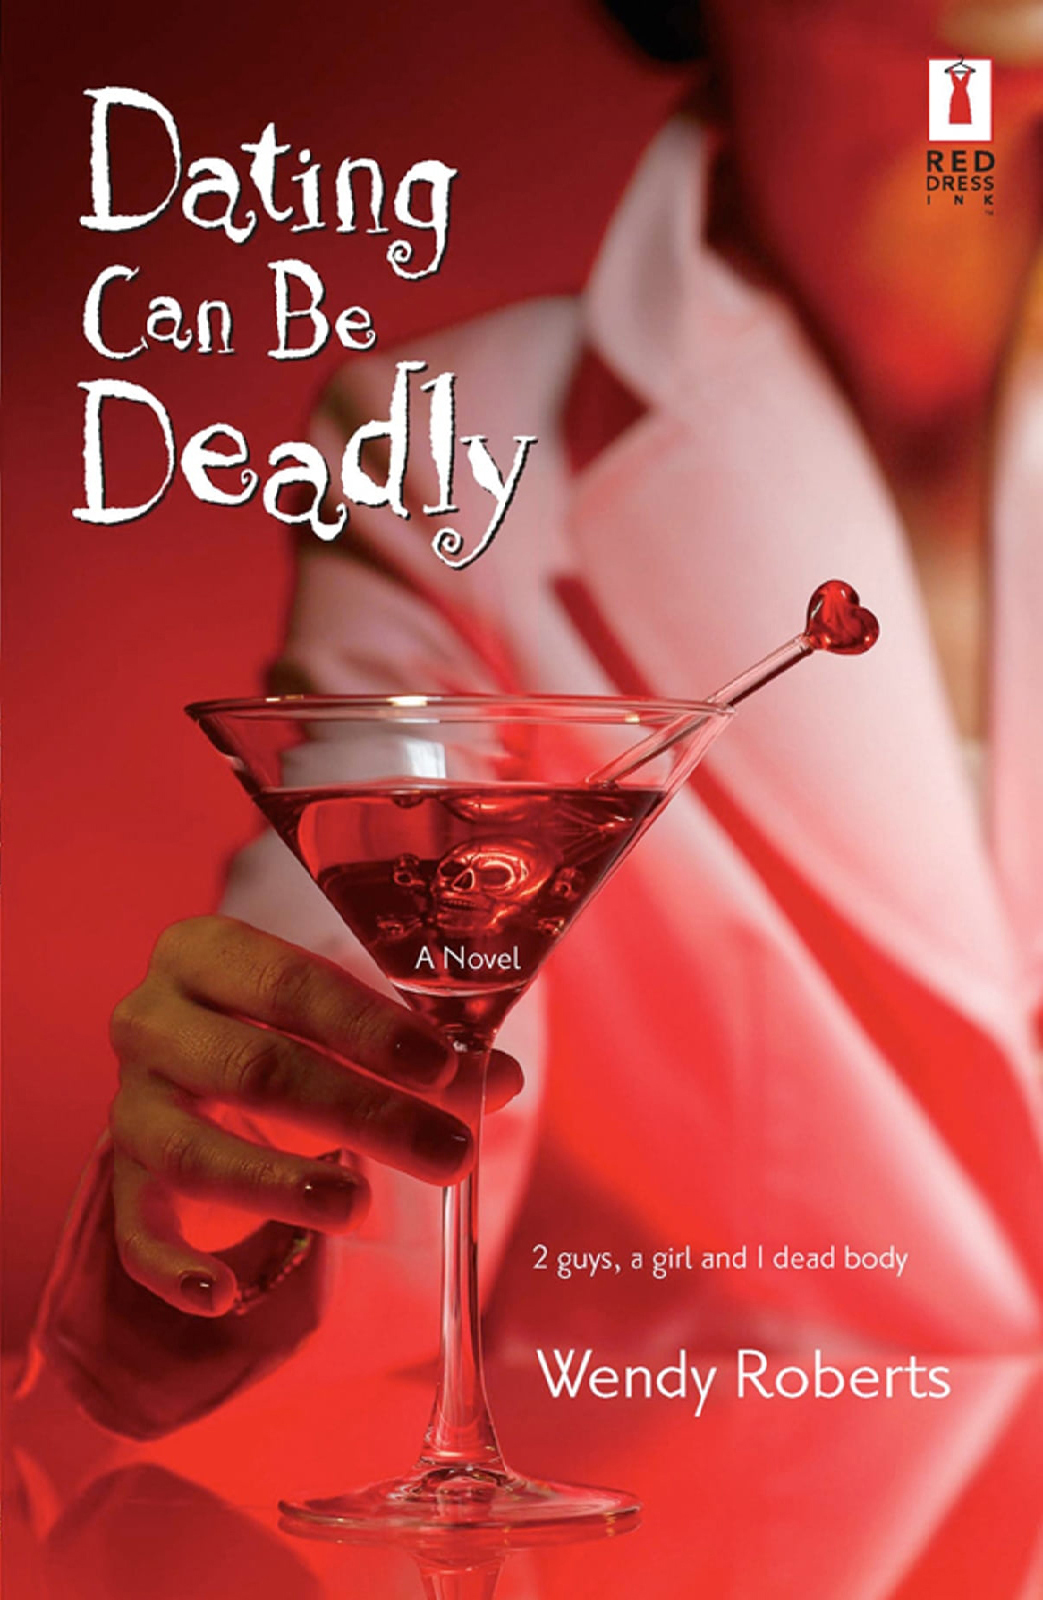 The cover of Dating Can Be Deadly by Wendy Roberts.